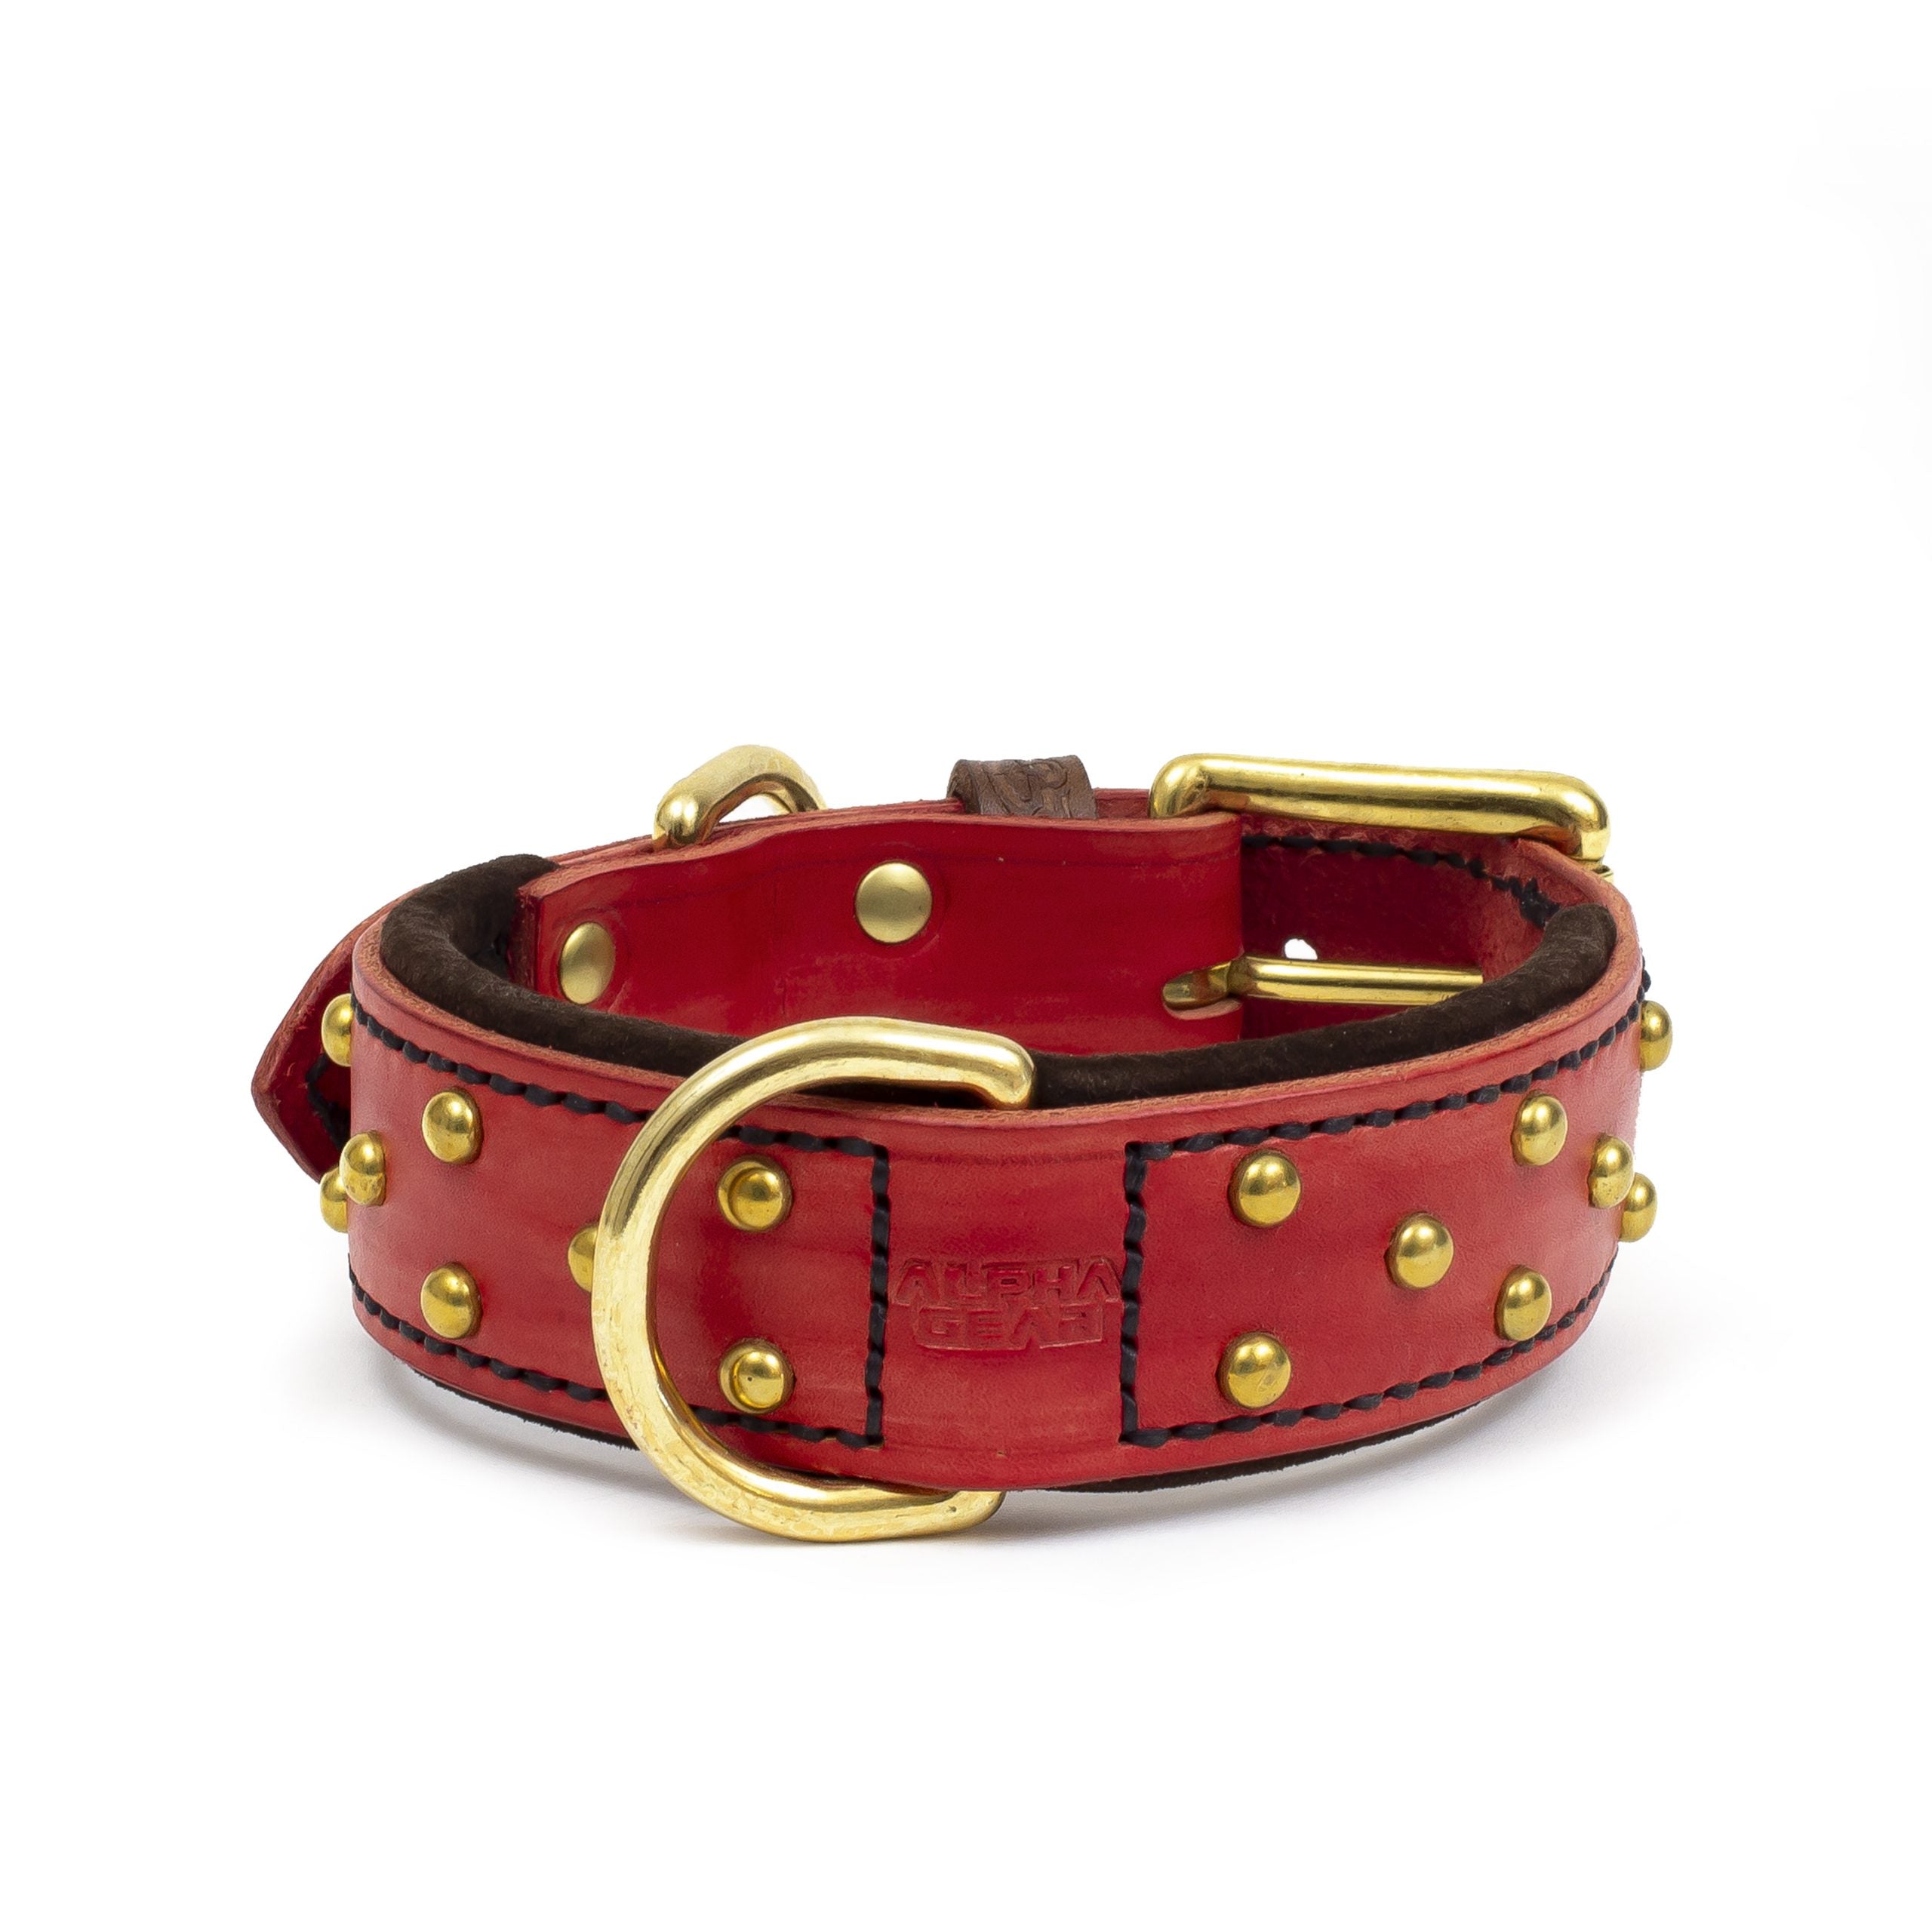 Leather Dog Collar (Adams Leather) - Red